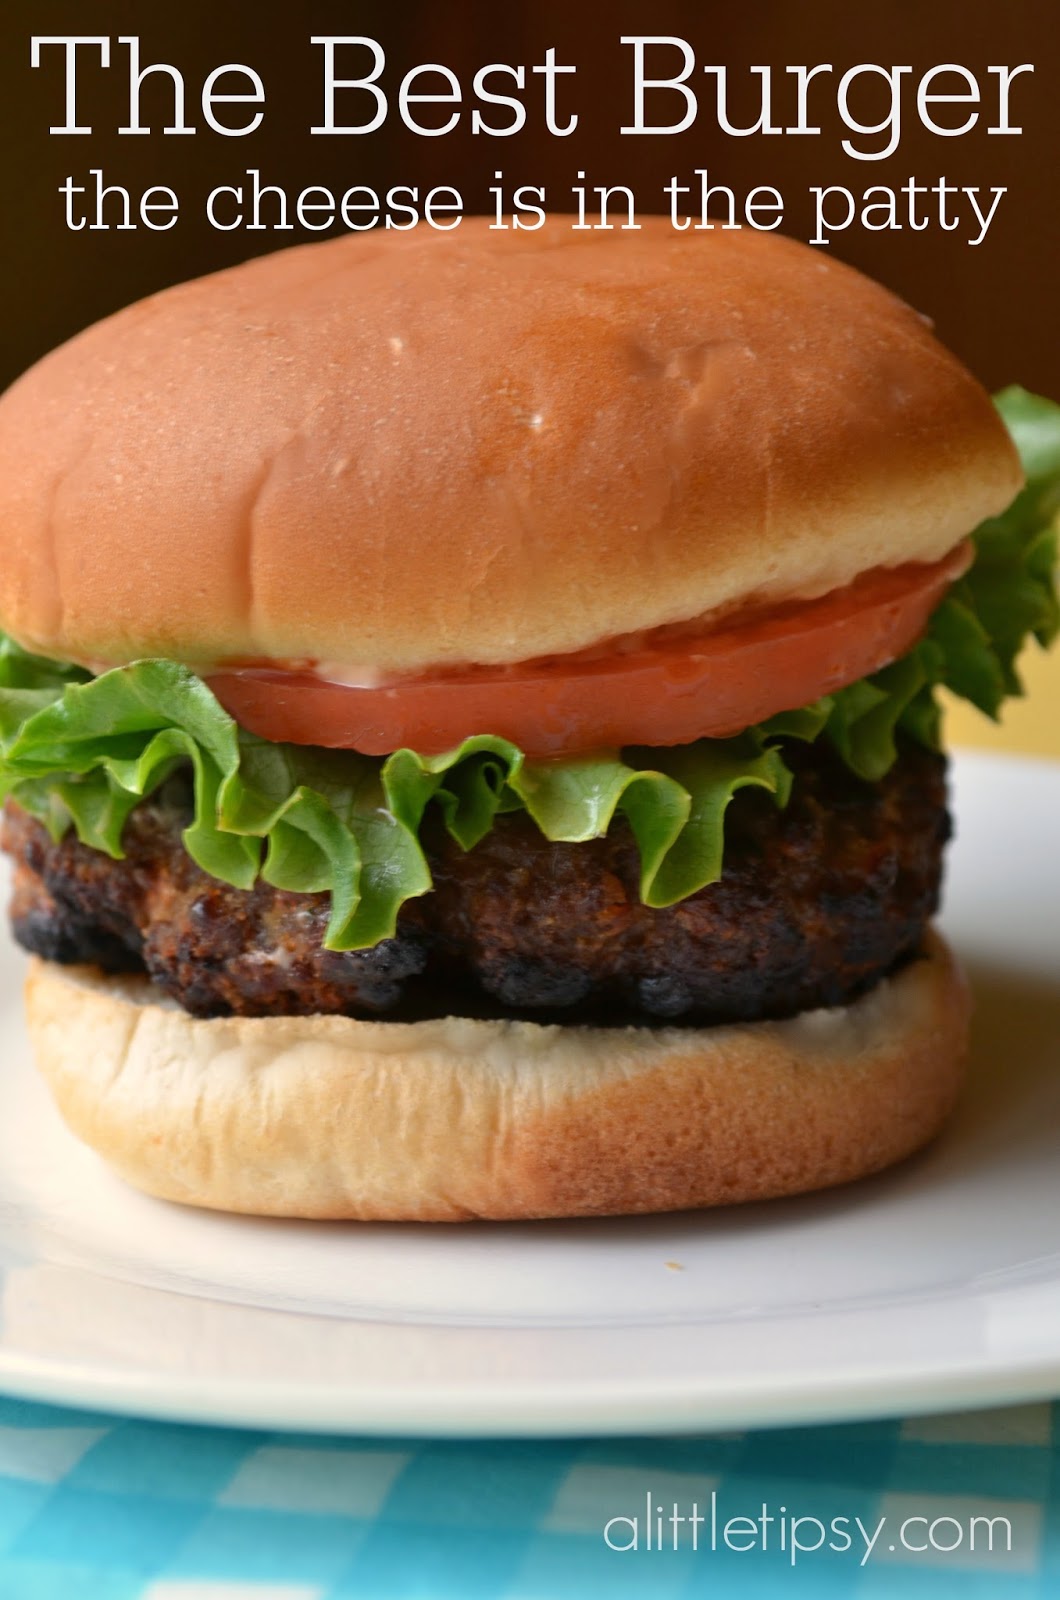 A delicious hamburger with lettuce and tomato on a white plate represents the The Best Burger Recipe